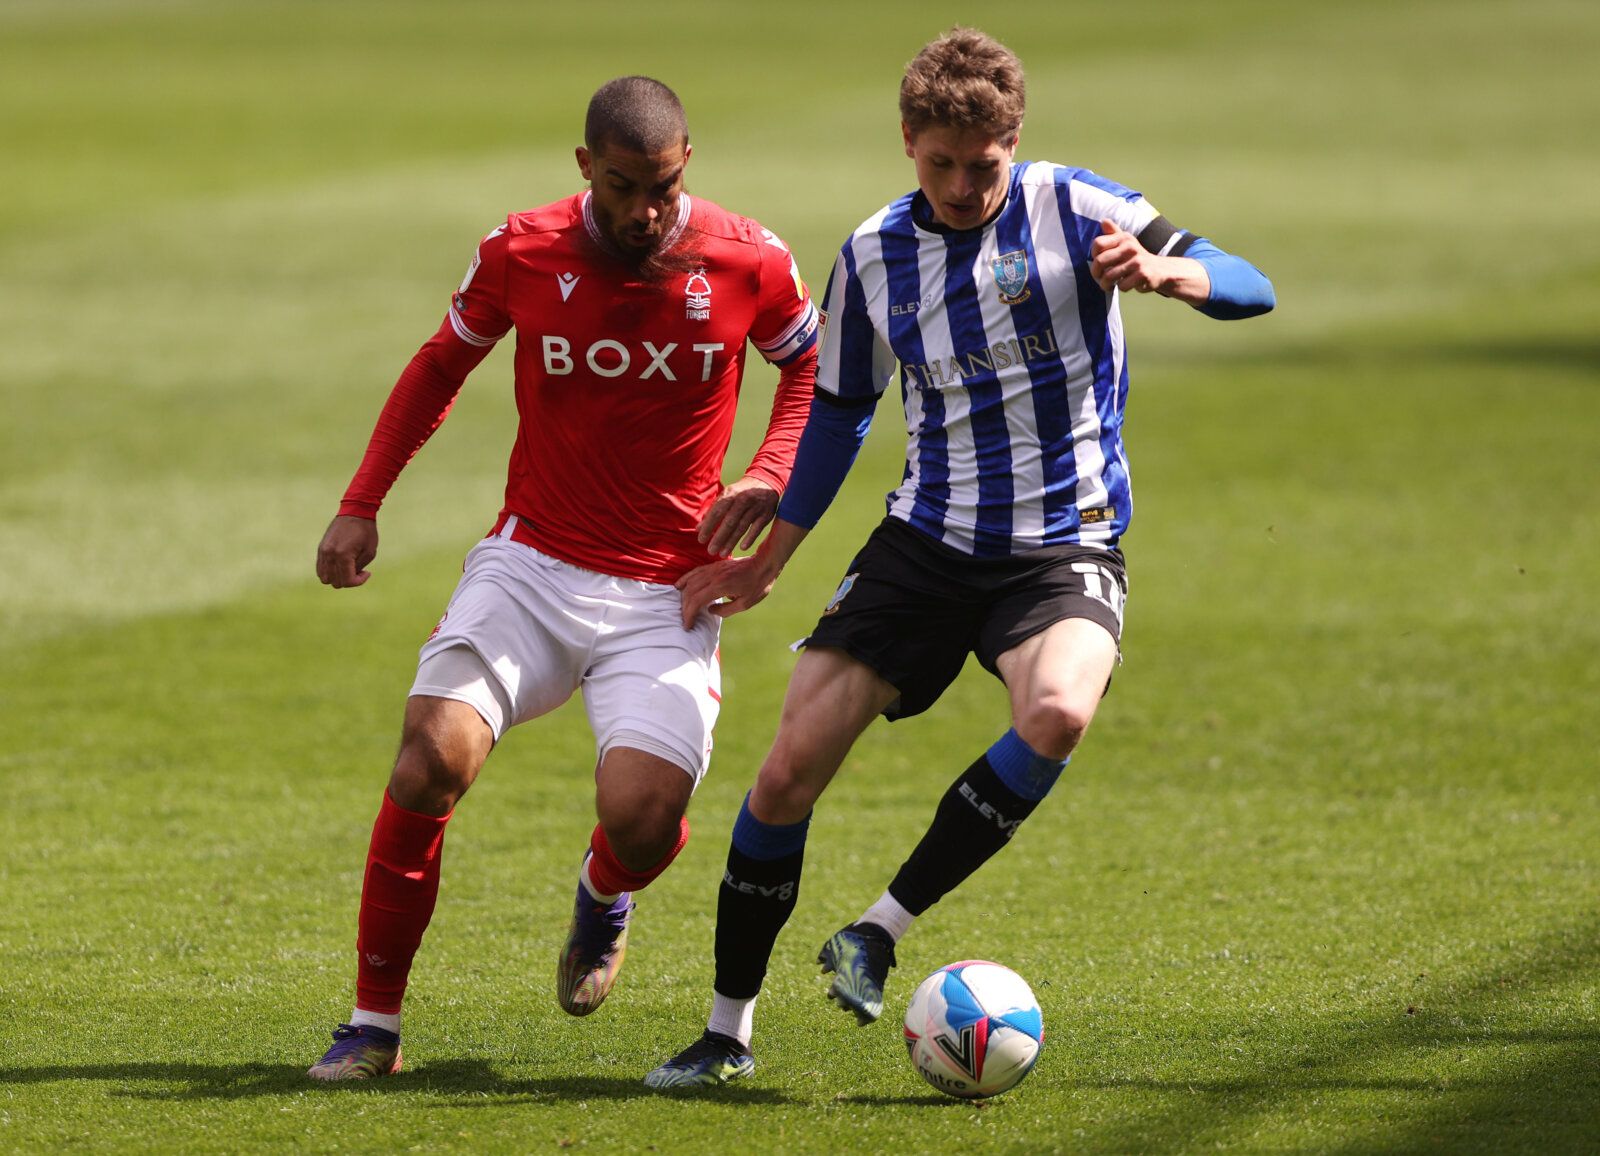 Soccer Football - Championship - Sheffield Wednesday v Nottingham Forest - Hillsborough, Sheffield, Britain - May 1, 2021 Nottingham Forest's Lewis Grabban in action with Sheffield Wednesday's Adam Reach Action Images/Molly Darlington EDITORIAL USE ONLY. No use with unauthorized audio, video, data, fixture lists, club/league logos or 'live' services. Online in-match use limited to 75 images, no video emulation. No use in betting, games or single club /league/player publications.  Please contact 